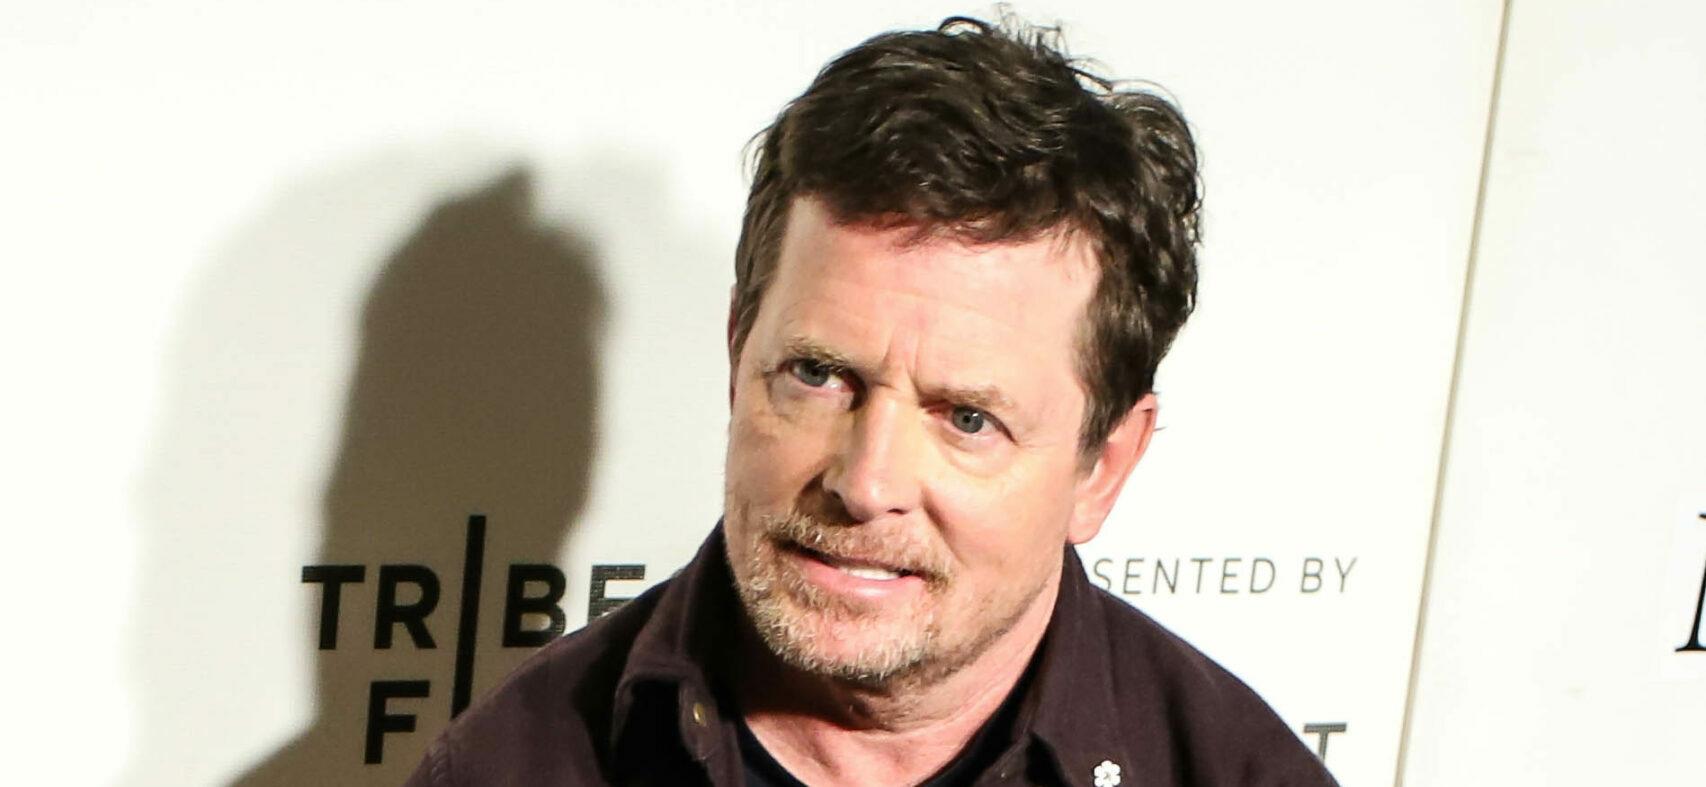 Michael J. Fox Talks Not Feeling Sorry For Himself Amid Parkinson’s: ‘Pity Is A Form Of Abuse’